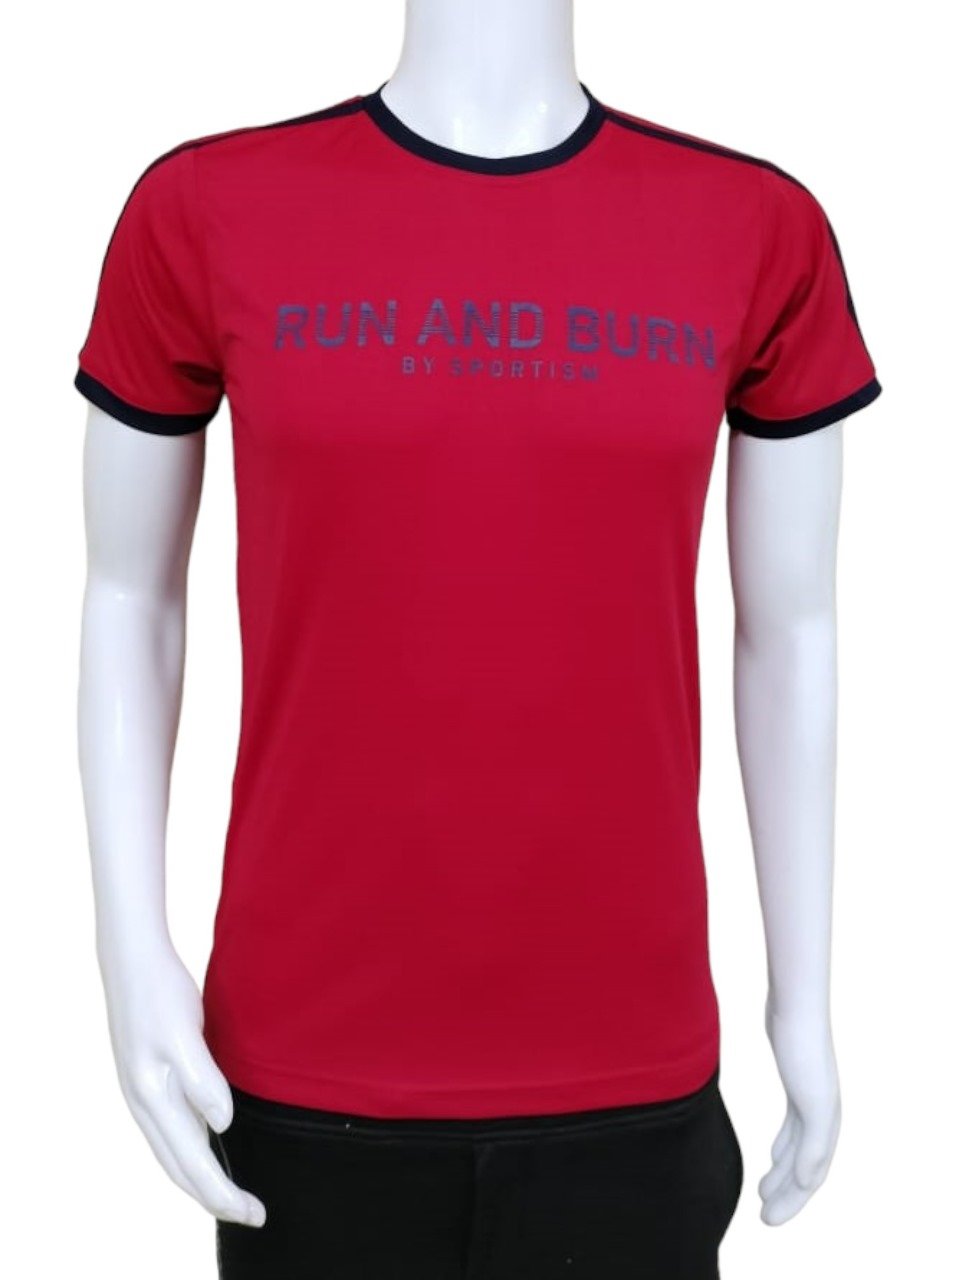 Sportism Half Sleeves T-Shirt in Red